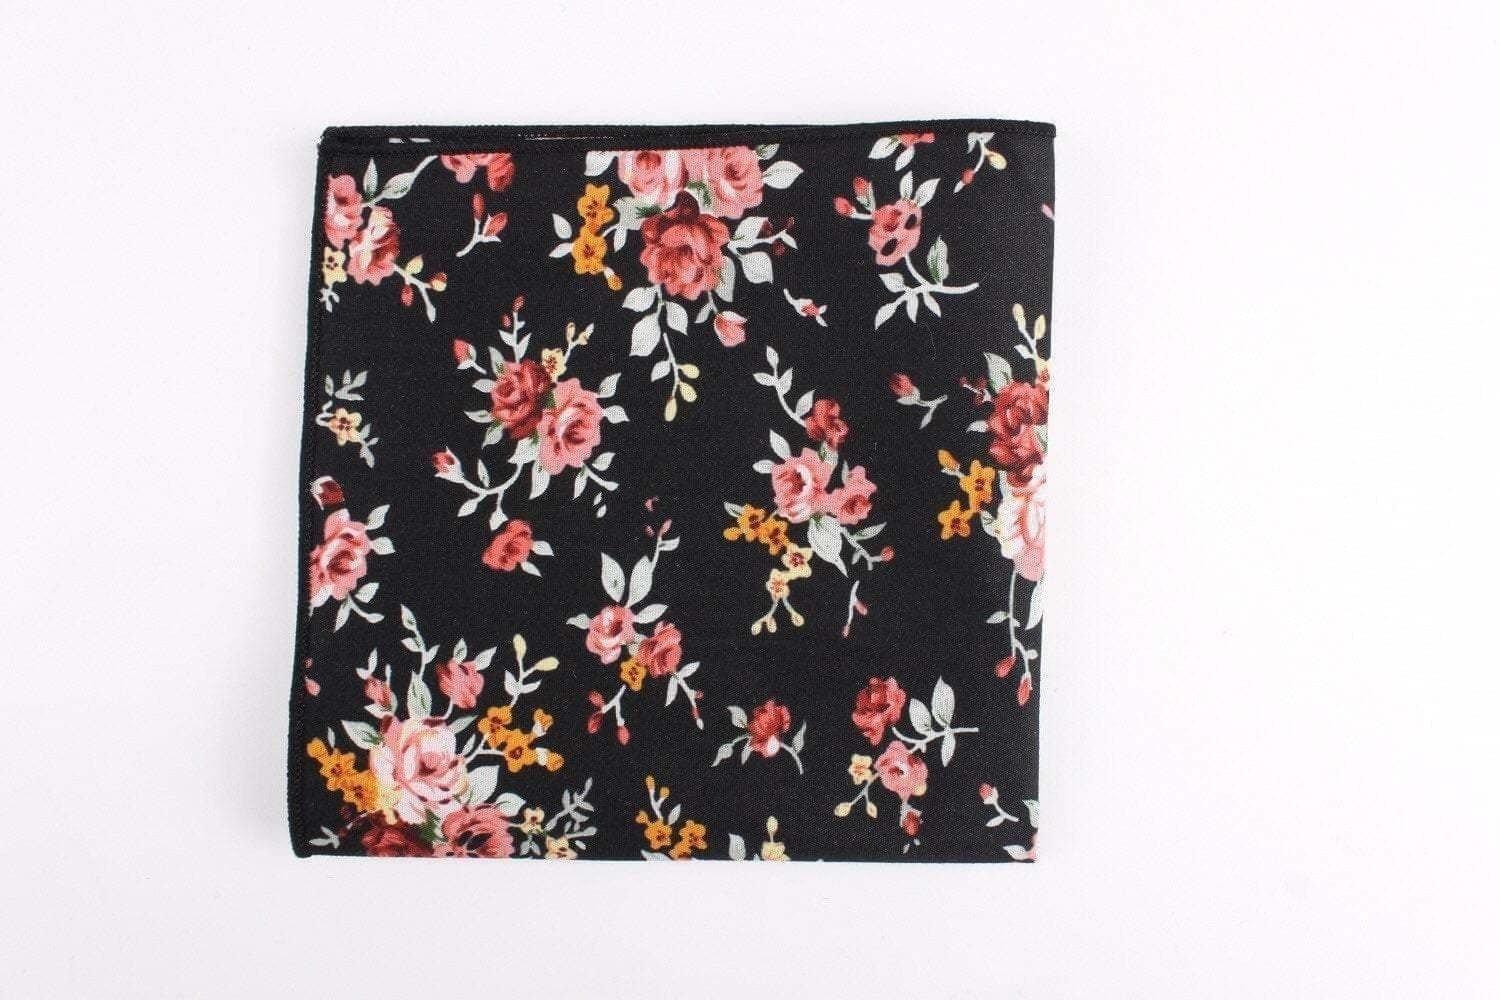 Black and Pink Floral Pocket Square JOE Mytieshop Black and Pink Floral Pocket Square Material CottonItem Length: 23 cm ( 9 inches)Item Width : 22 cm (8.6 inches) Elevate your outfit with this dapper floral pocket square. This pocket square is perfect for dressing up any outfit. With a playful floral print in stylish black, red, pink and orange, this is a must-have for any modern man. With its versatile design, this pocket square is a great addition to any outfit. So whether you're dressing up f